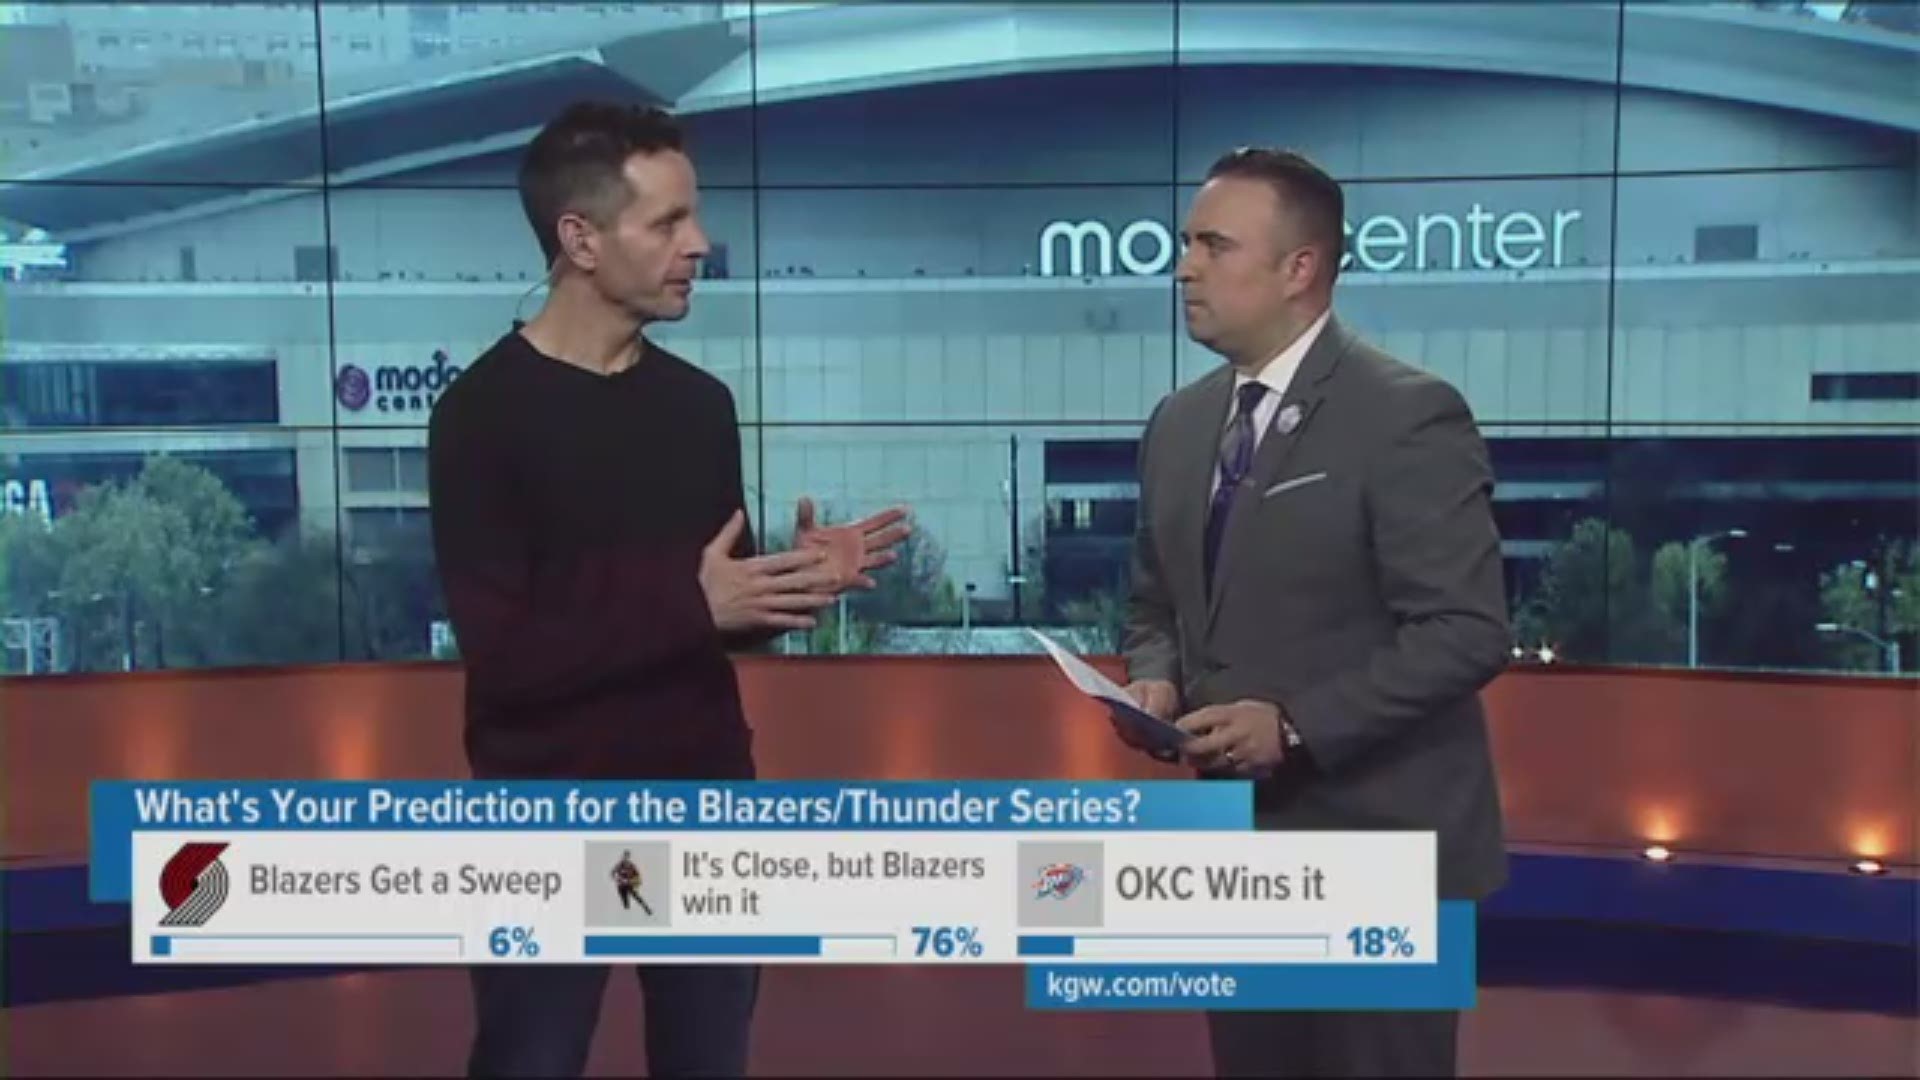 KGW's Orlando Sanchez, Art Edwards, and Chad Doing with Rip City Radio and NBC Sports Northwest breaks down the first round NBA playoffs series between the Portland Trail Blazers and the Oklahoma City.